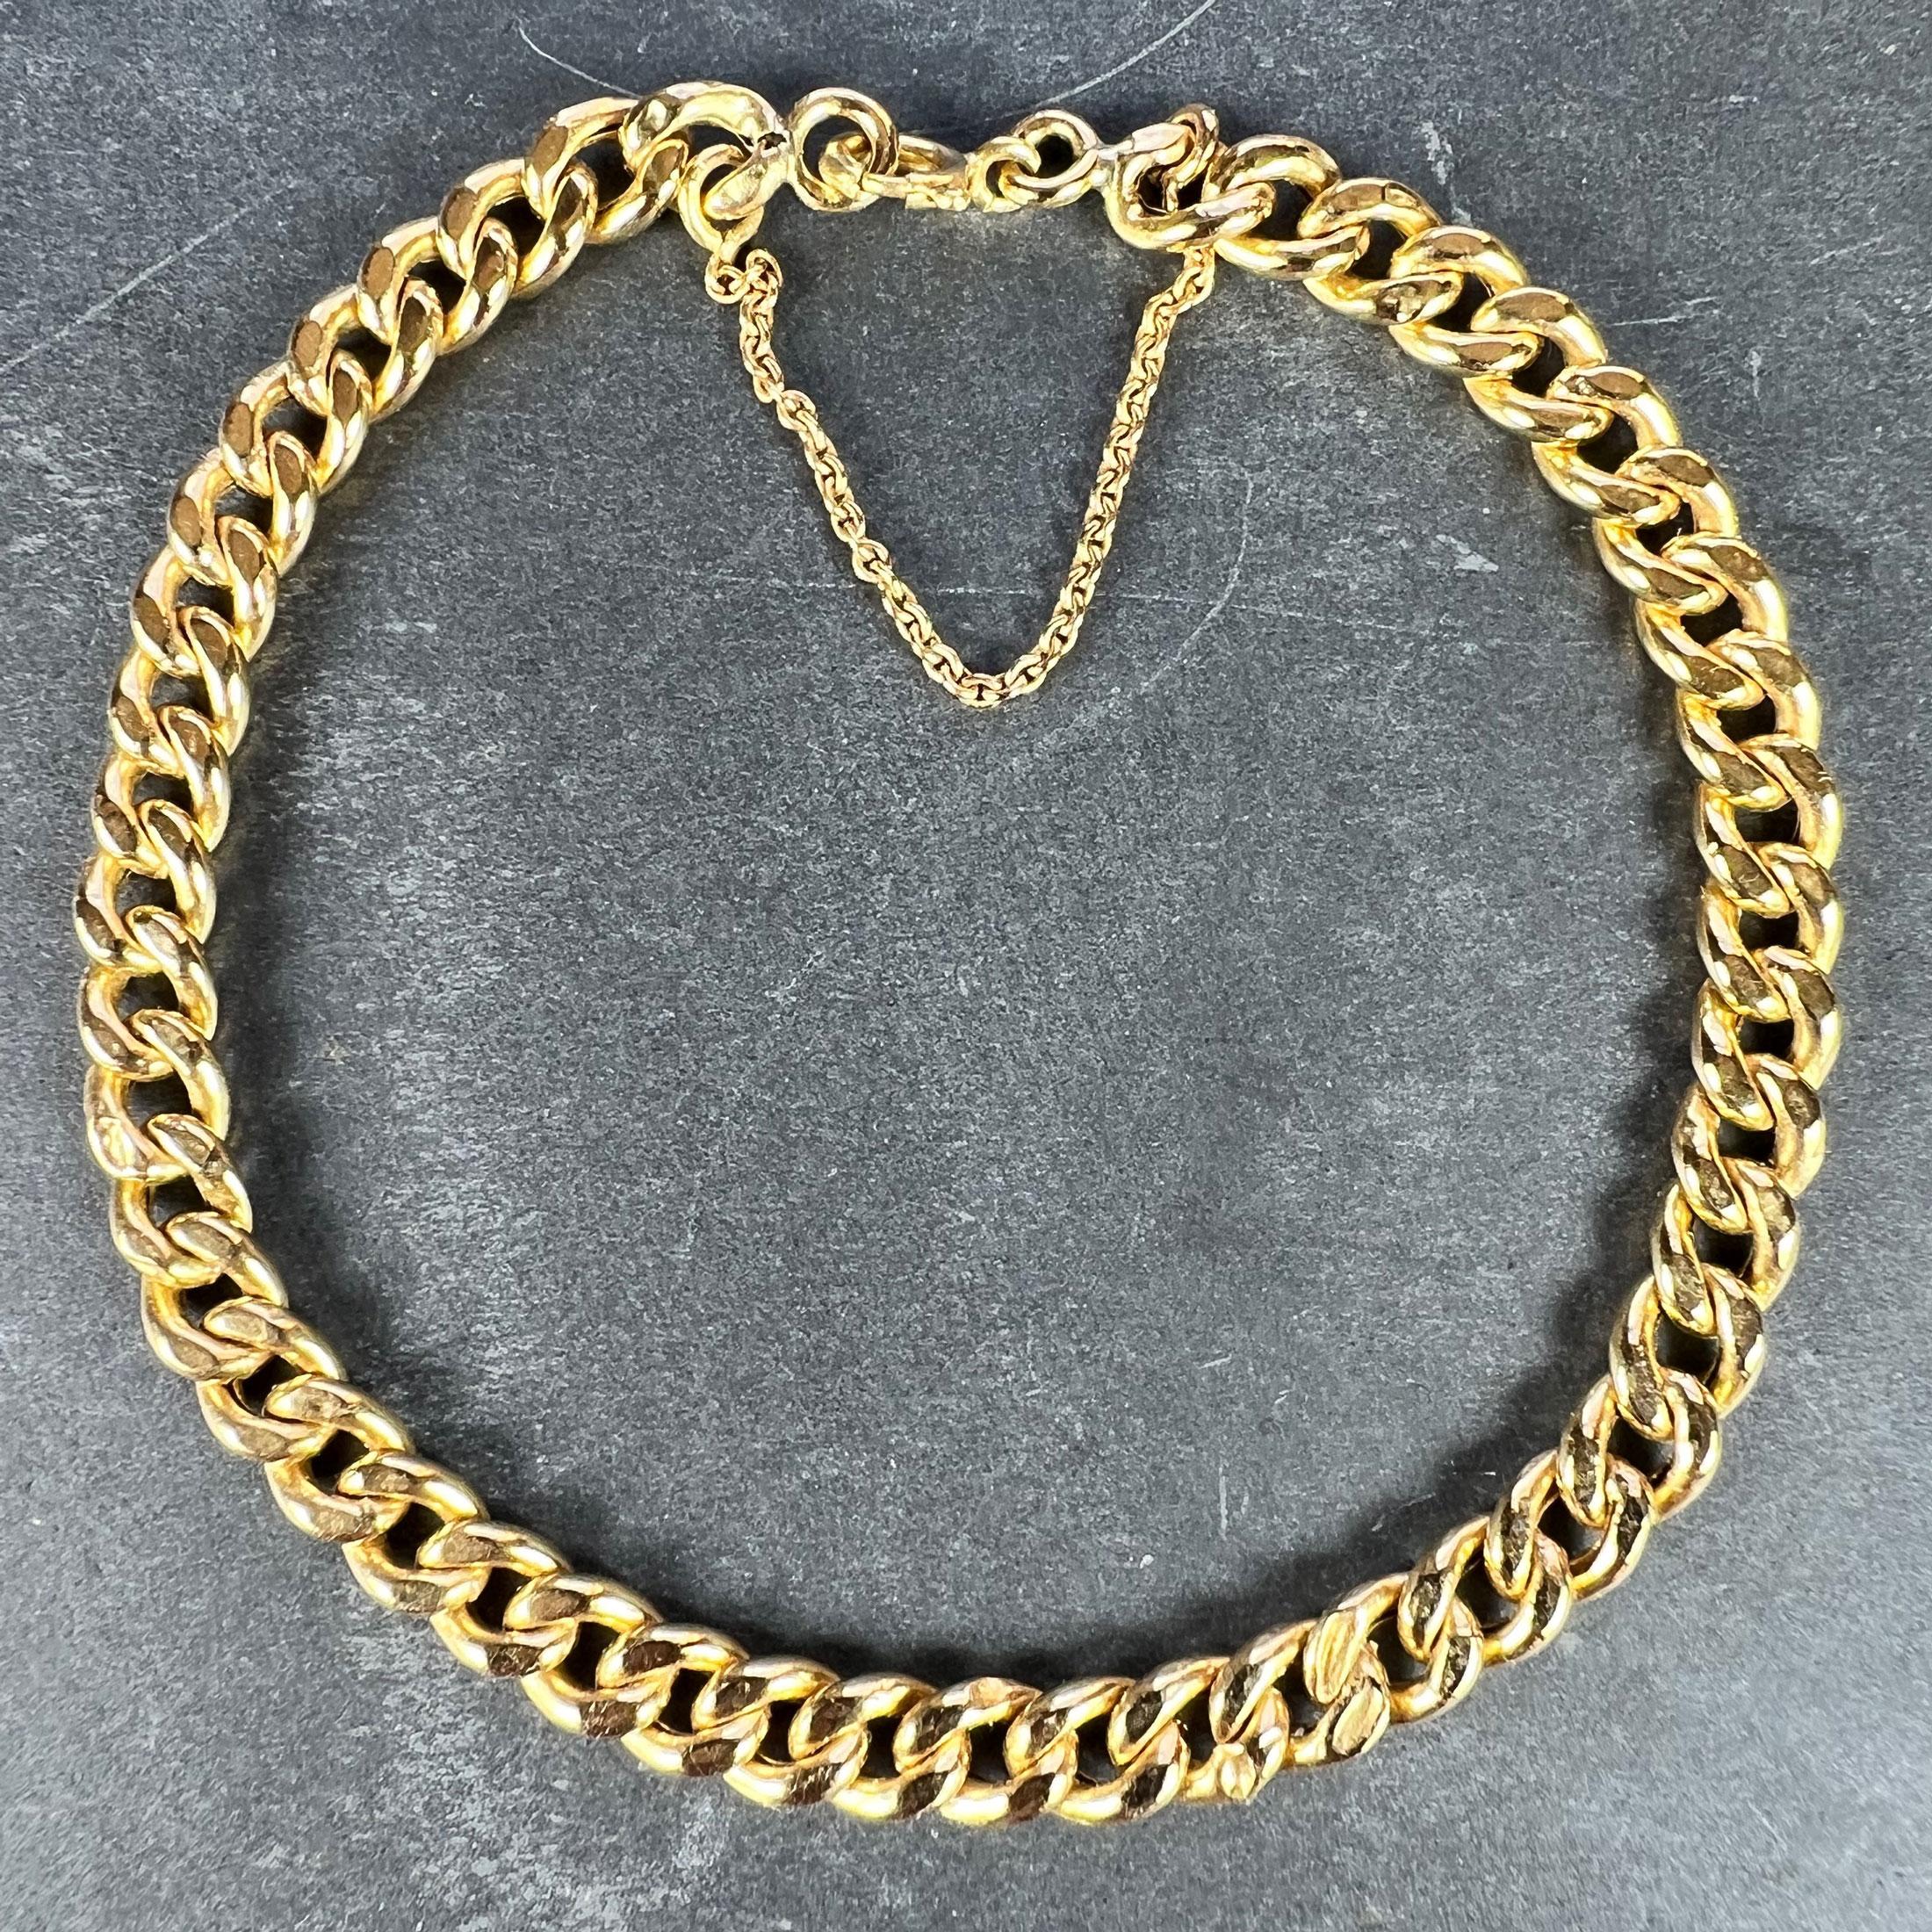 An 18 karat (18K) yellow gold curb link chain bracelet with hollow curb links and a spring ring clasp. Fitted with a safety chain to the clasp. Stamped with the French import mark and 750 for 18 karat gold. Some slight dents to the